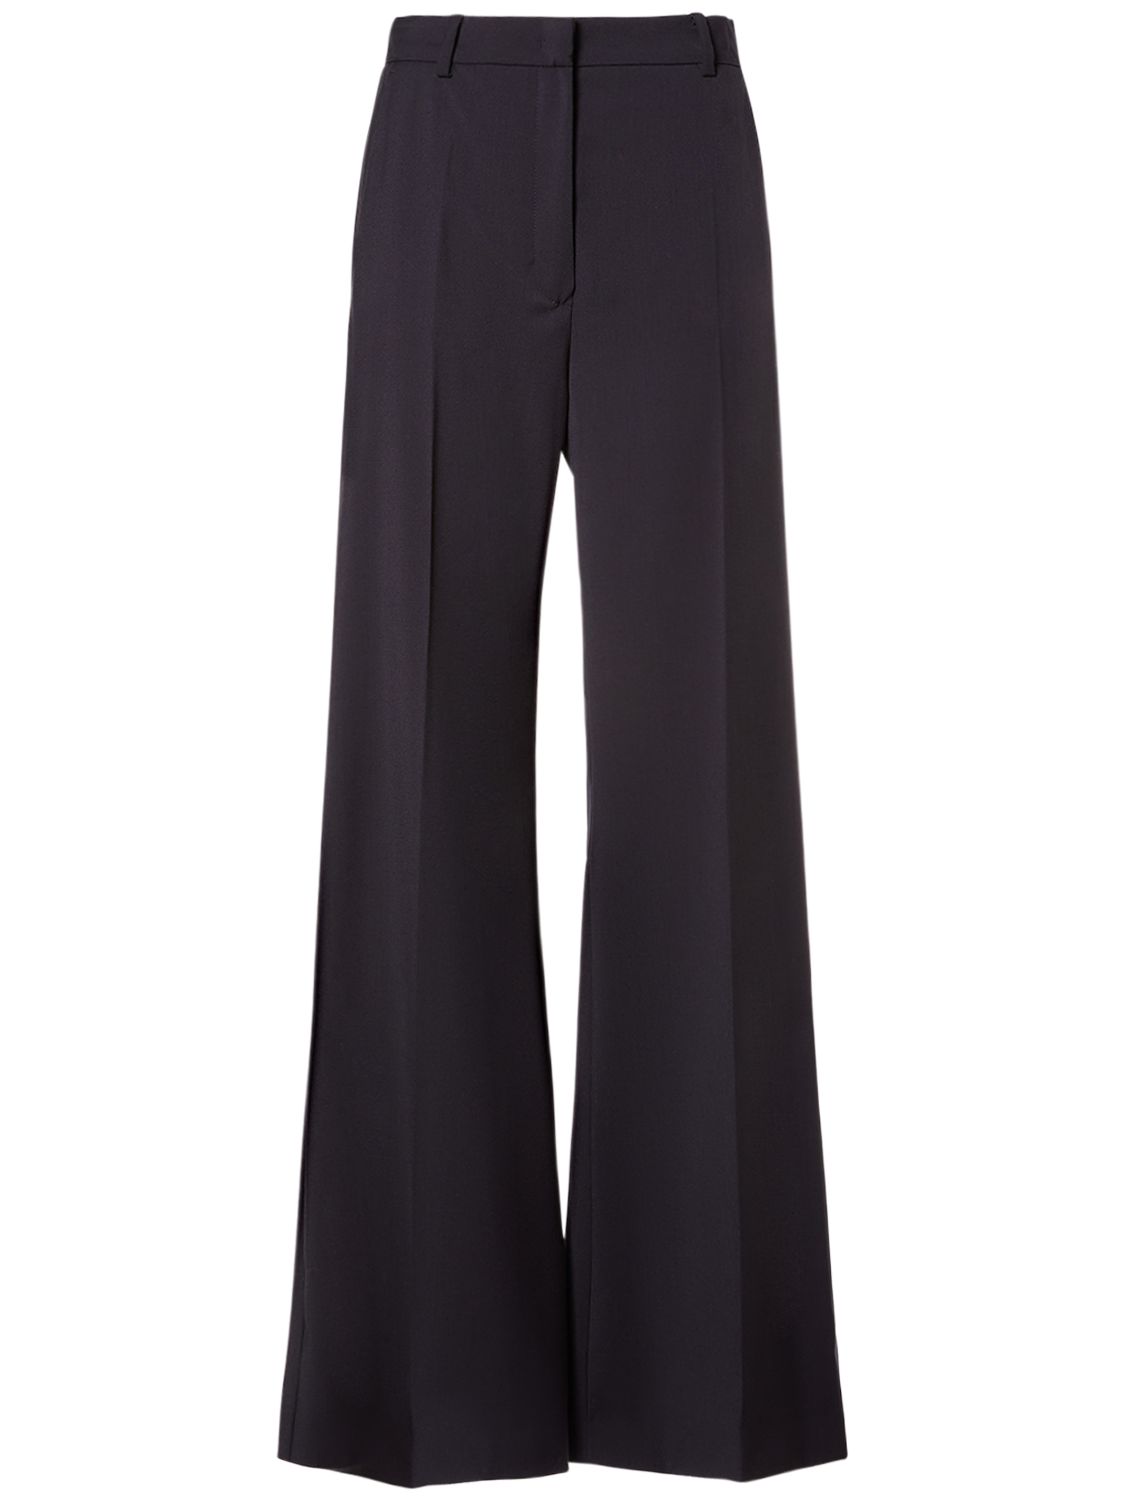 Sonale Stretch Wool Flared Pants